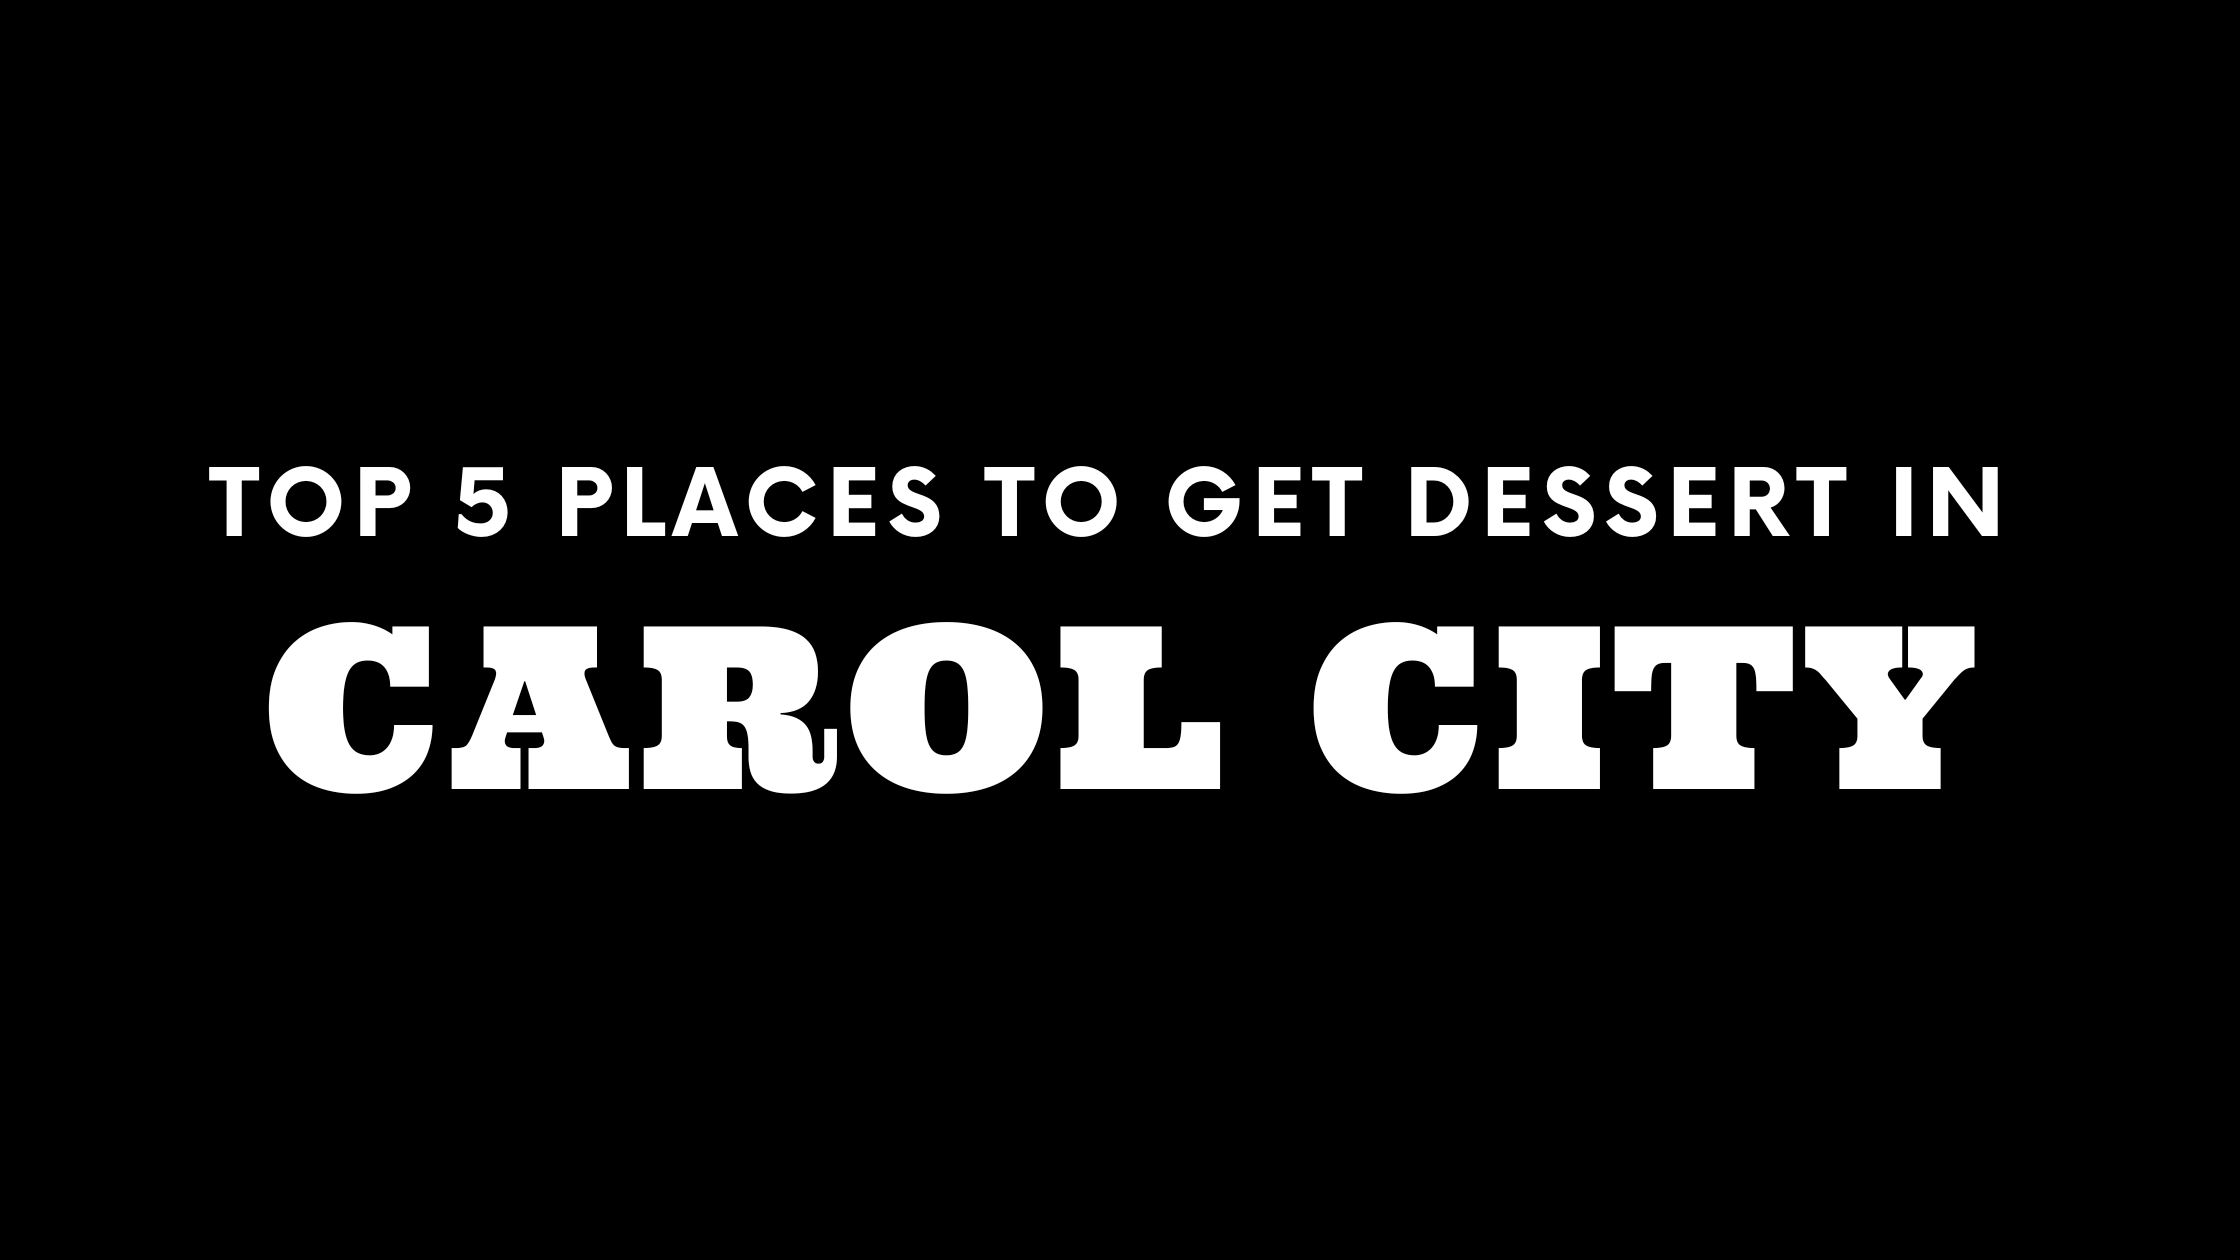 Top 5 Places to Get Dessert in Carol City